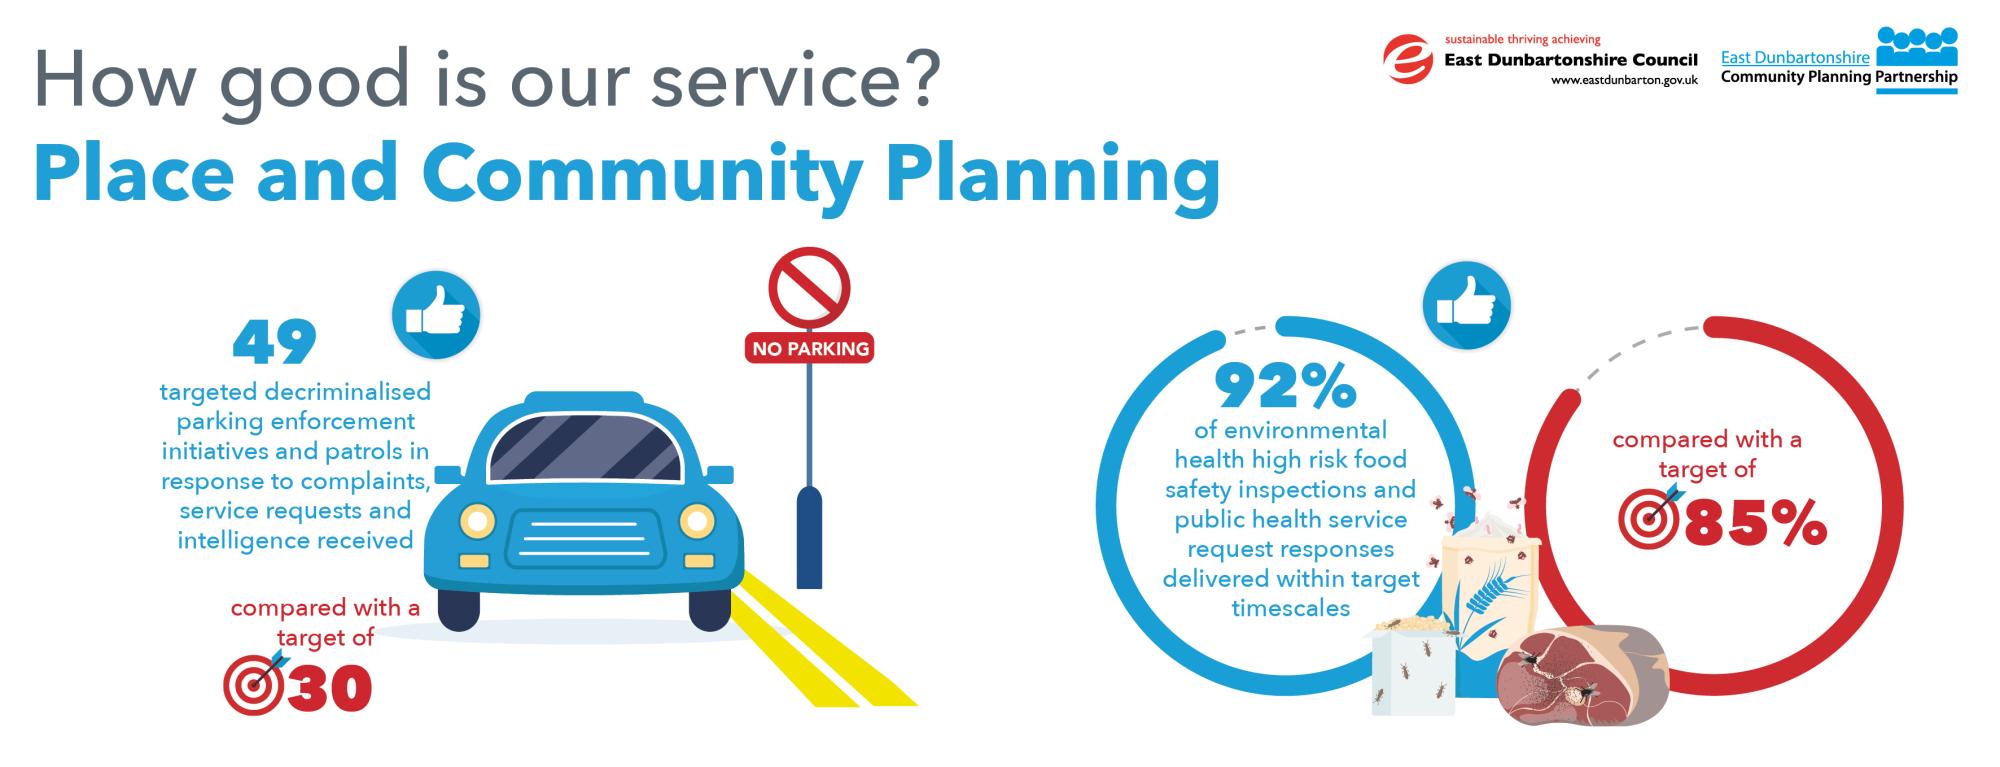 place and community planning infographic